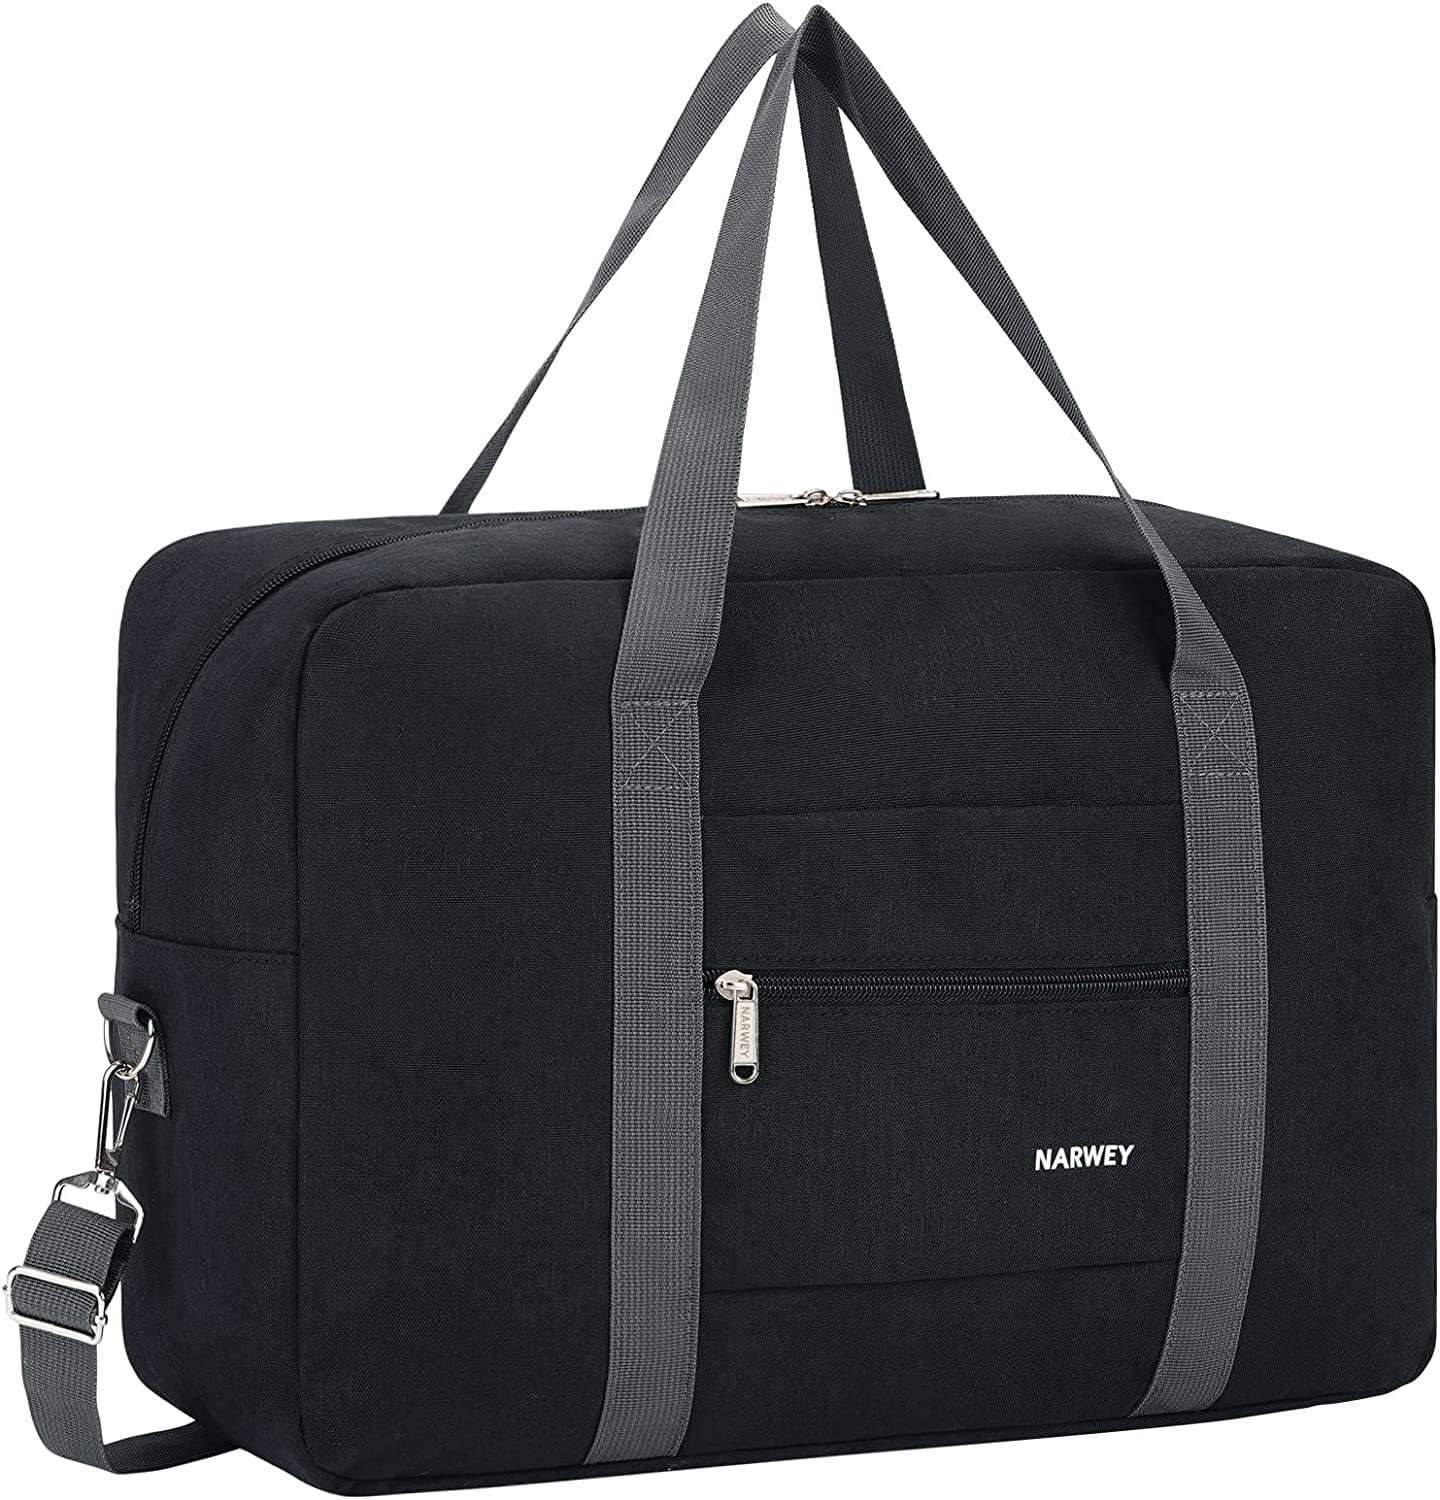 <p><a href="https://www.amazon.com/Packable-Duffel-Travel-Weekender-Duffle/dp/B0BBR6PKLQ/">BUY NOW</a></p><p>$14</p><p><a href="https://www.amazon.com/Packable-Duffel-Travel-Weekender-Duffle/dp/B0BBR6PKLQ/" class="ga-track"><strong>Narwey Foldable Travel Duffel Bag</strong></a> ($14) </p> <p>The Narwey Foldable Travel Duffel Bag is a foldable and affordable travel option that comes in a ton of different colors and prints. It has two top-handle carrying straps, a detachable shoulder strap, a trolley sleeve, and an external zipper pocket. The bag is made from a thick waterproof material that can hold its shape. Plus, it's a bestseller on Amazon.</p> <p><strong>Dimensions:</strong> 13" height x 18" width x 6.3" depth</p>